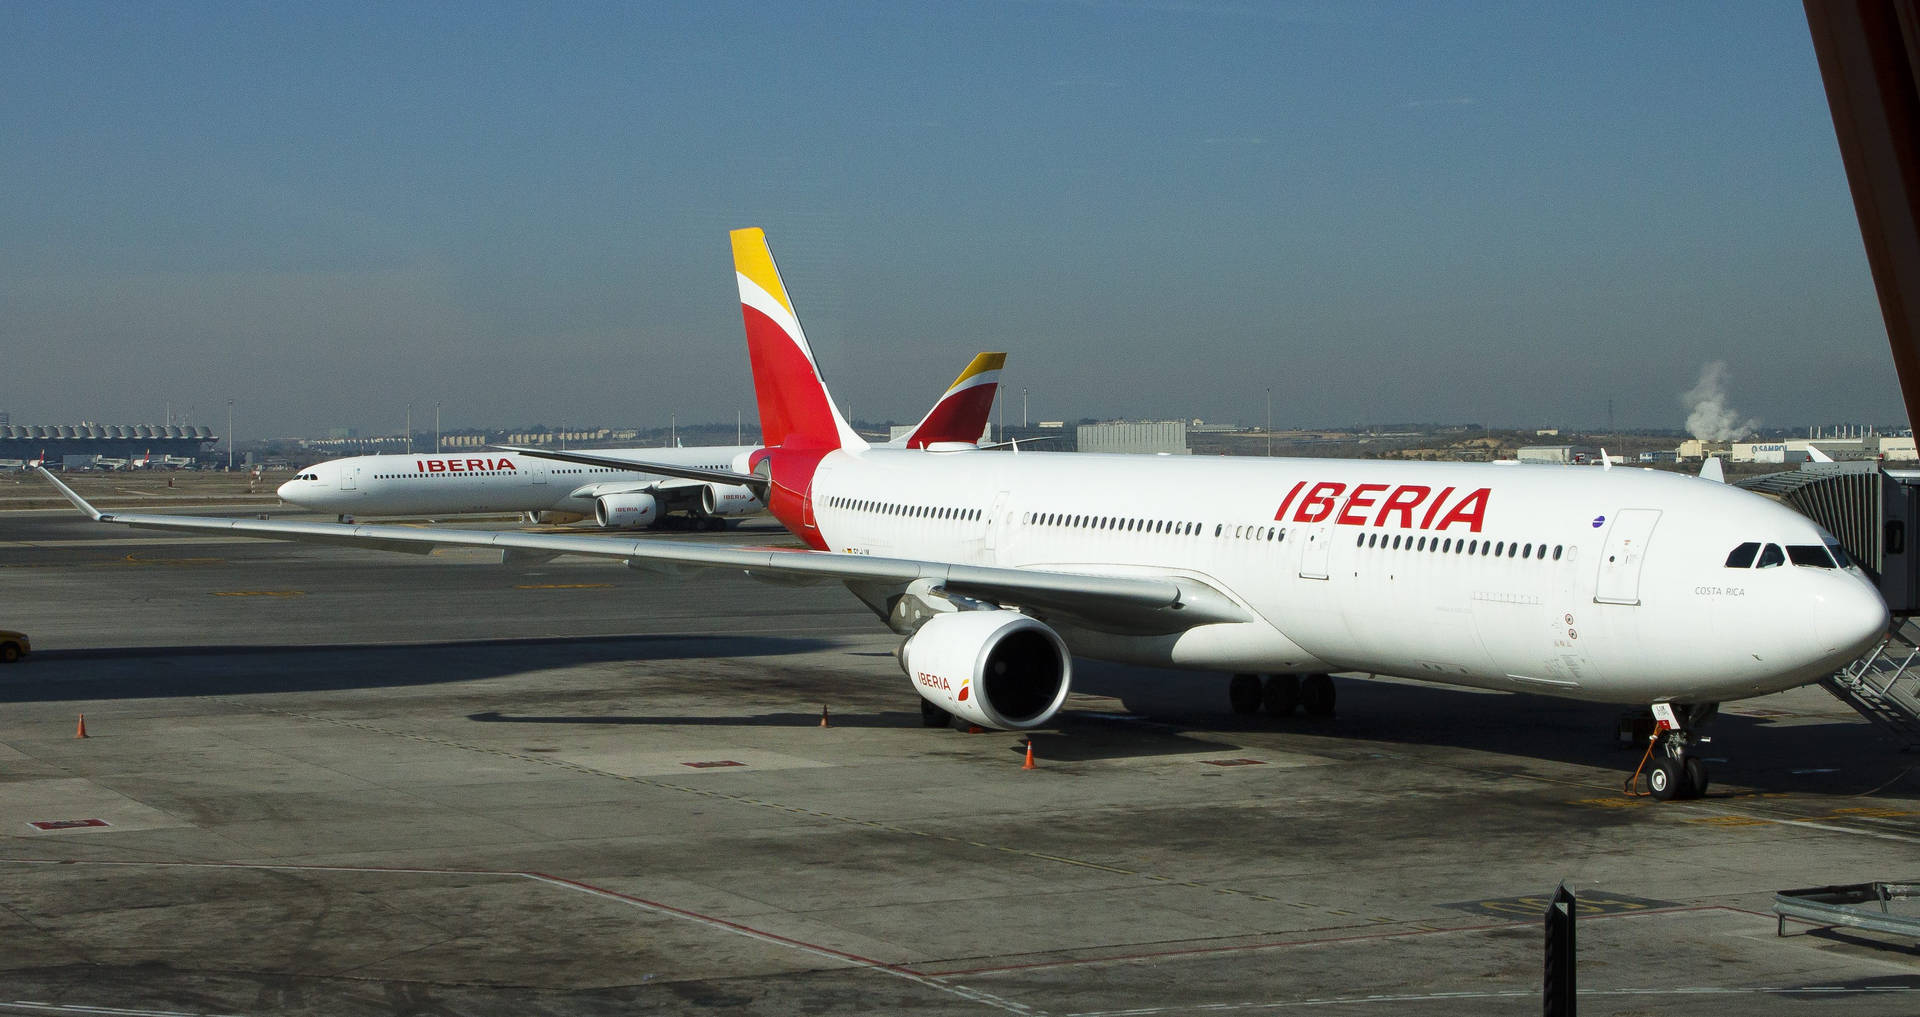 Iberia Airlines Parked Airplane Wallpaper